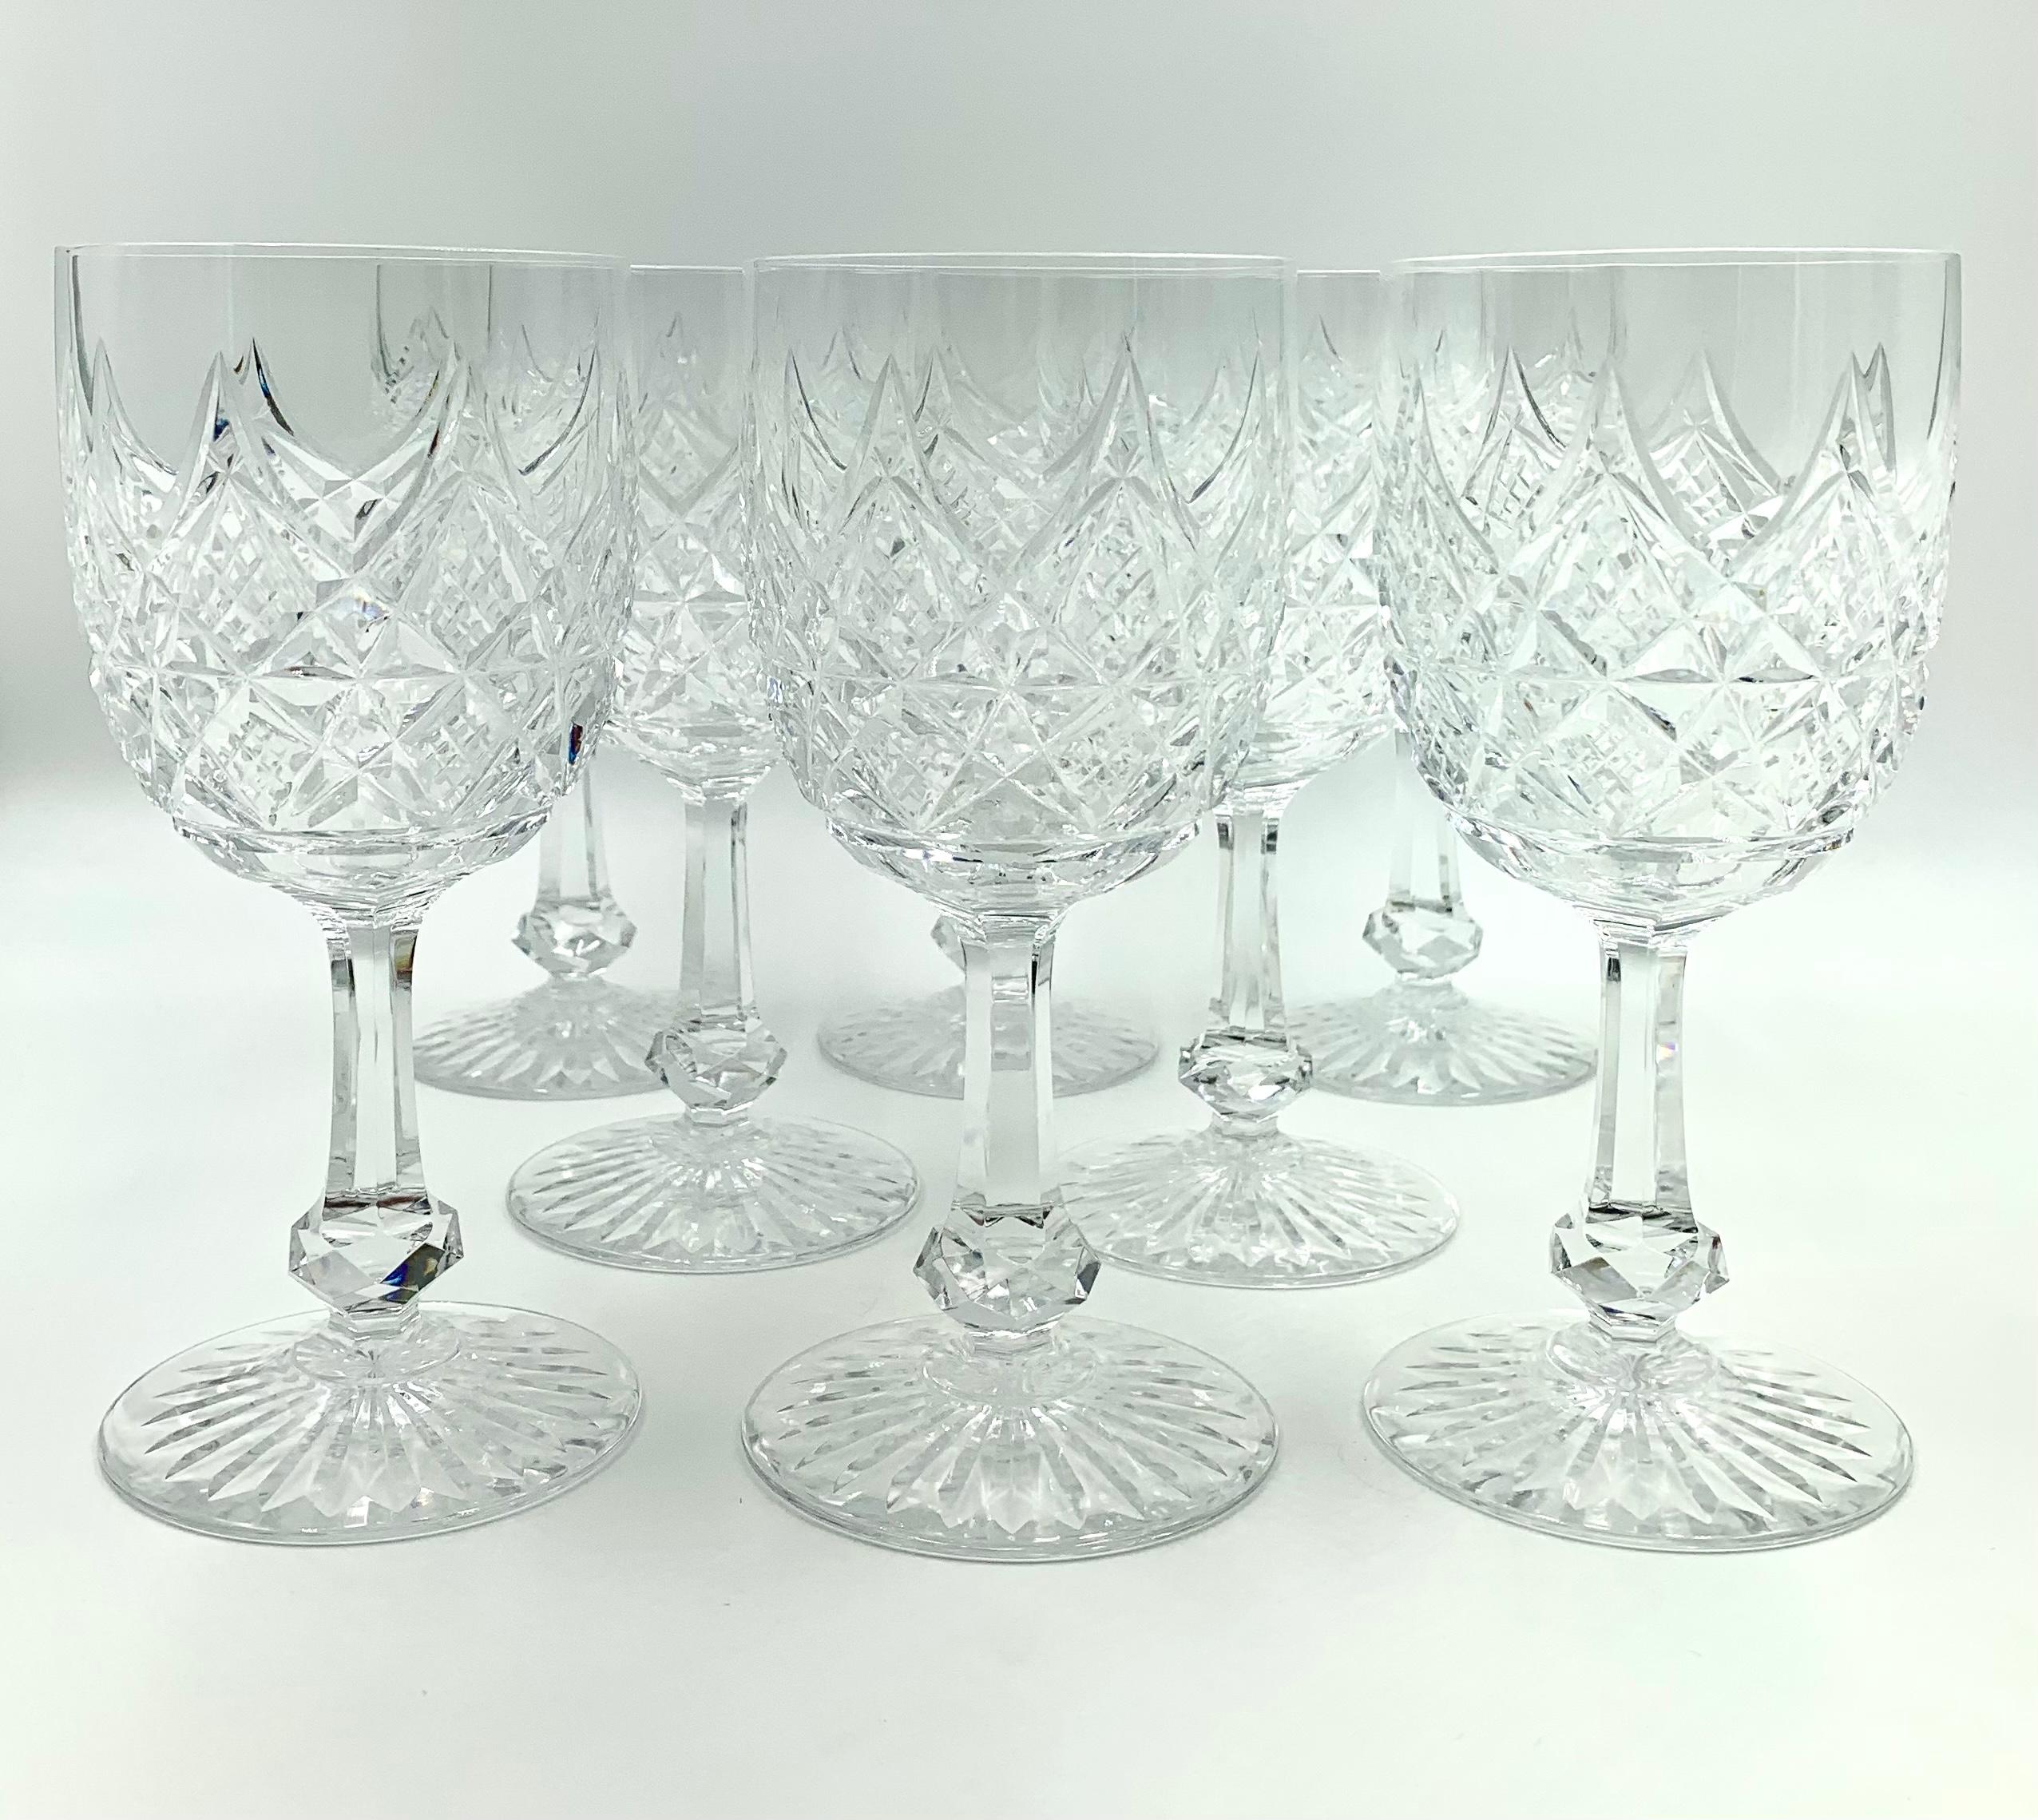 Beaux Arts Rare Luxurious 24 Piece Baccarat Colbert Stemware Service for Eight For Sale